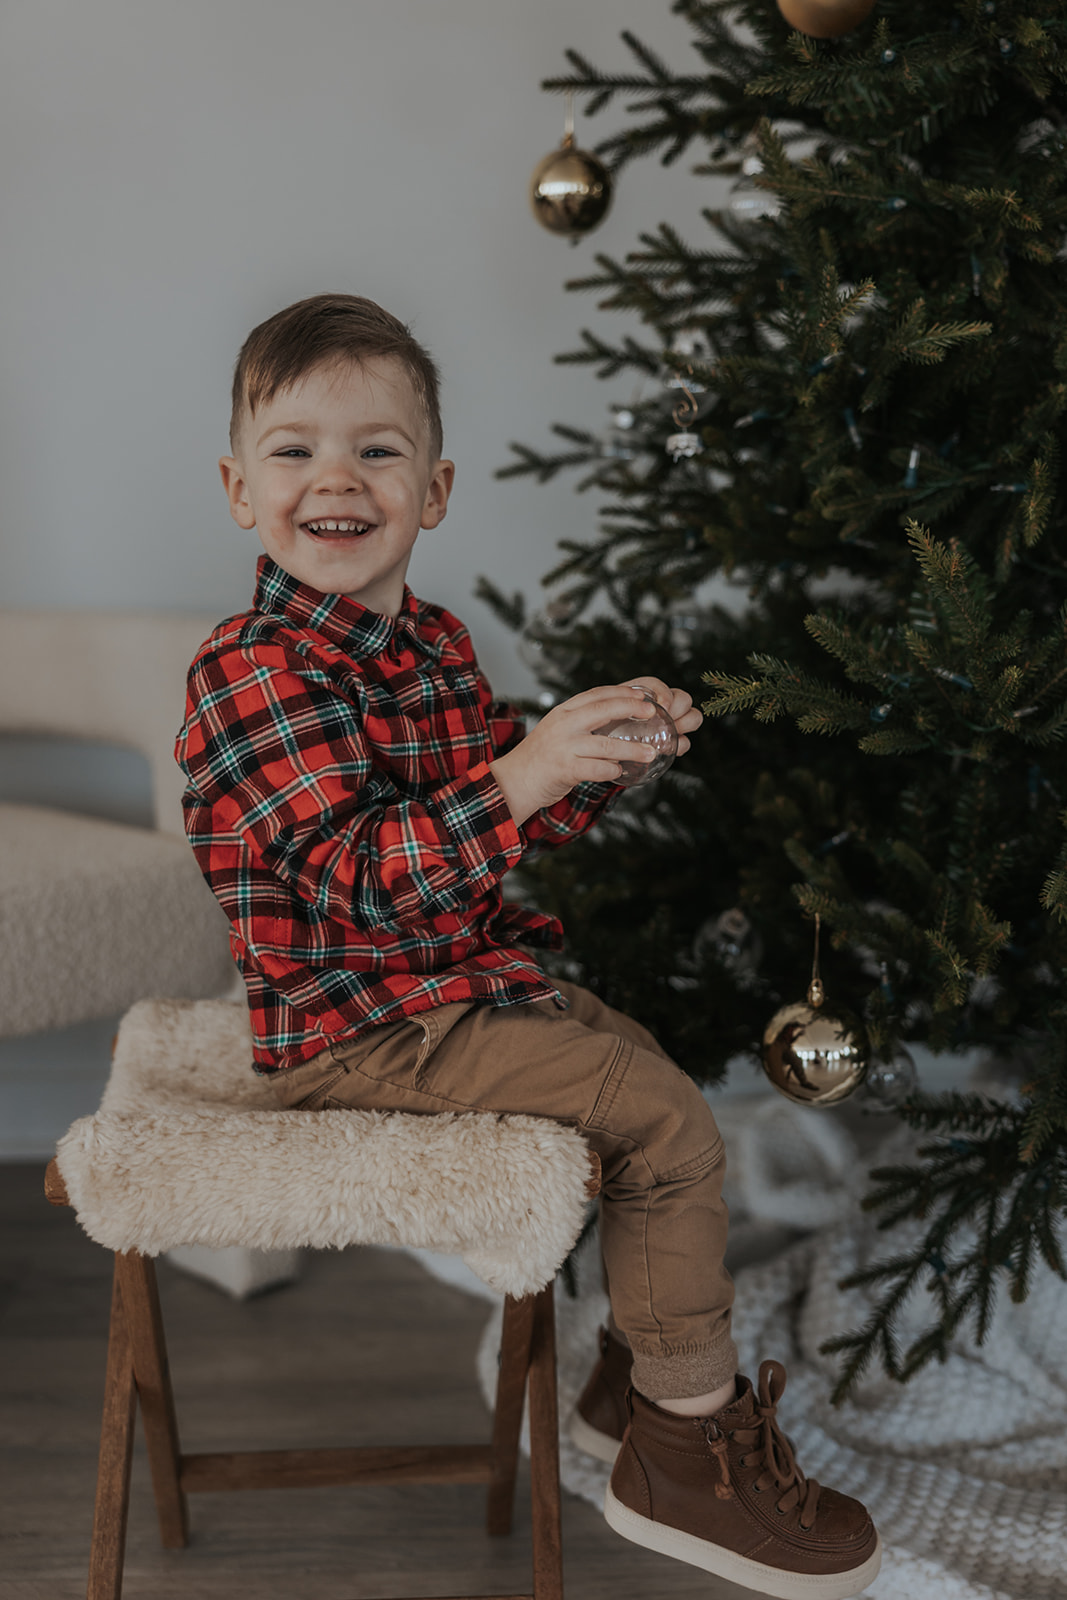 Boy in flannel shirt enjoys the Christmas tree during his families Christmas photoshoot